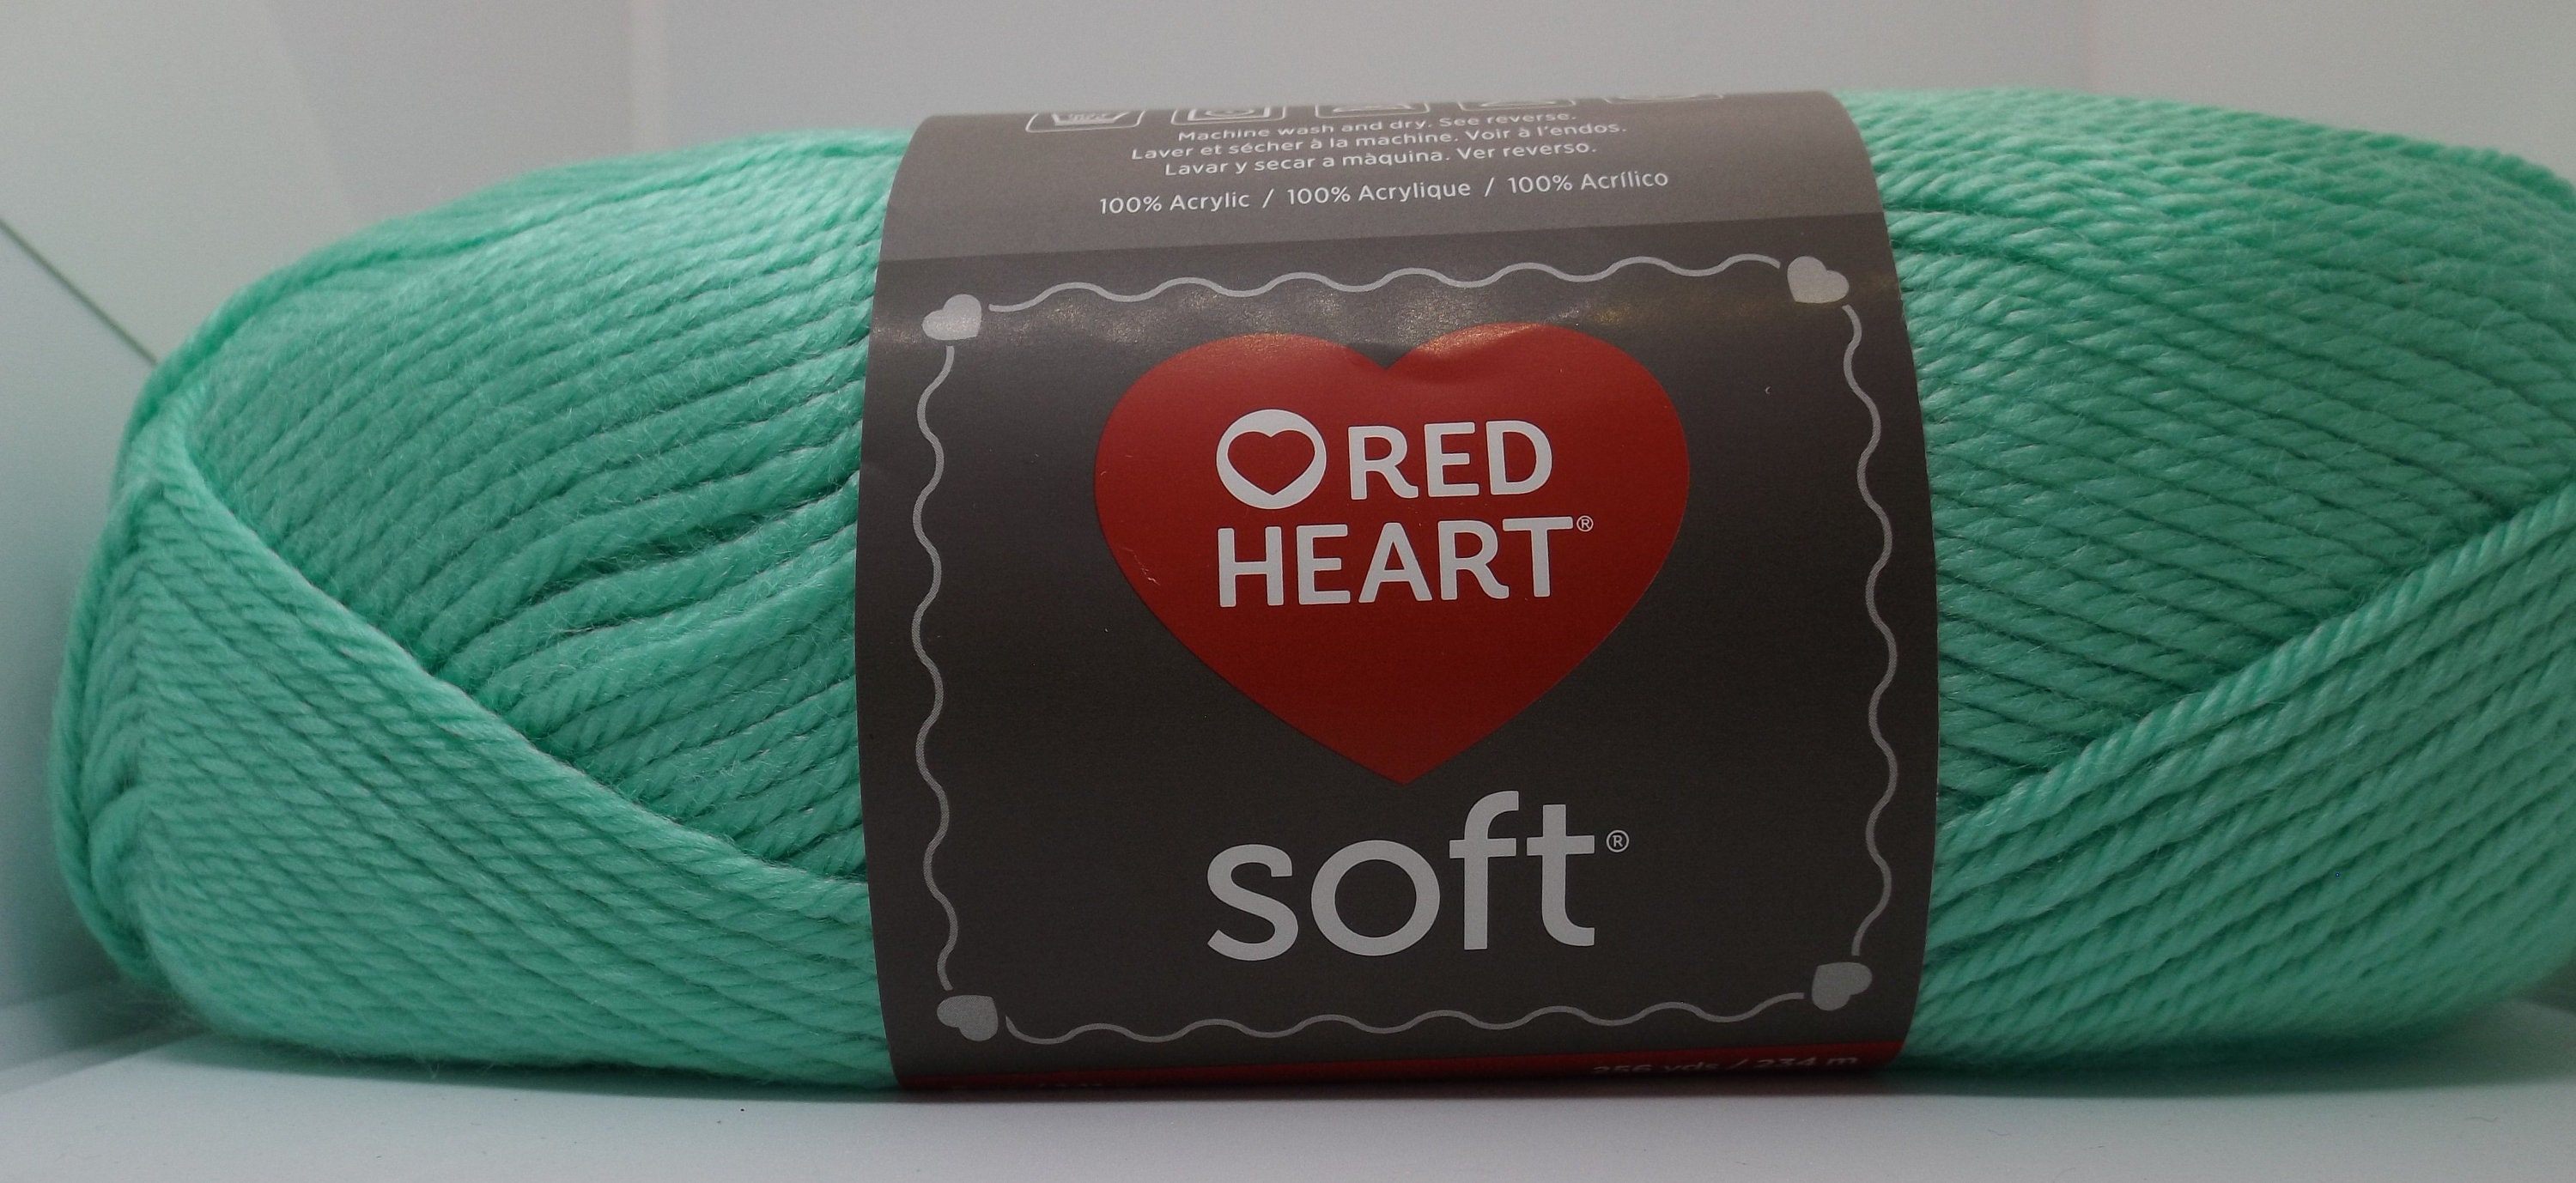 Red Heart With Love Metallic Yarn 8672 Olive 4 Med 4.5oz/127 Grams